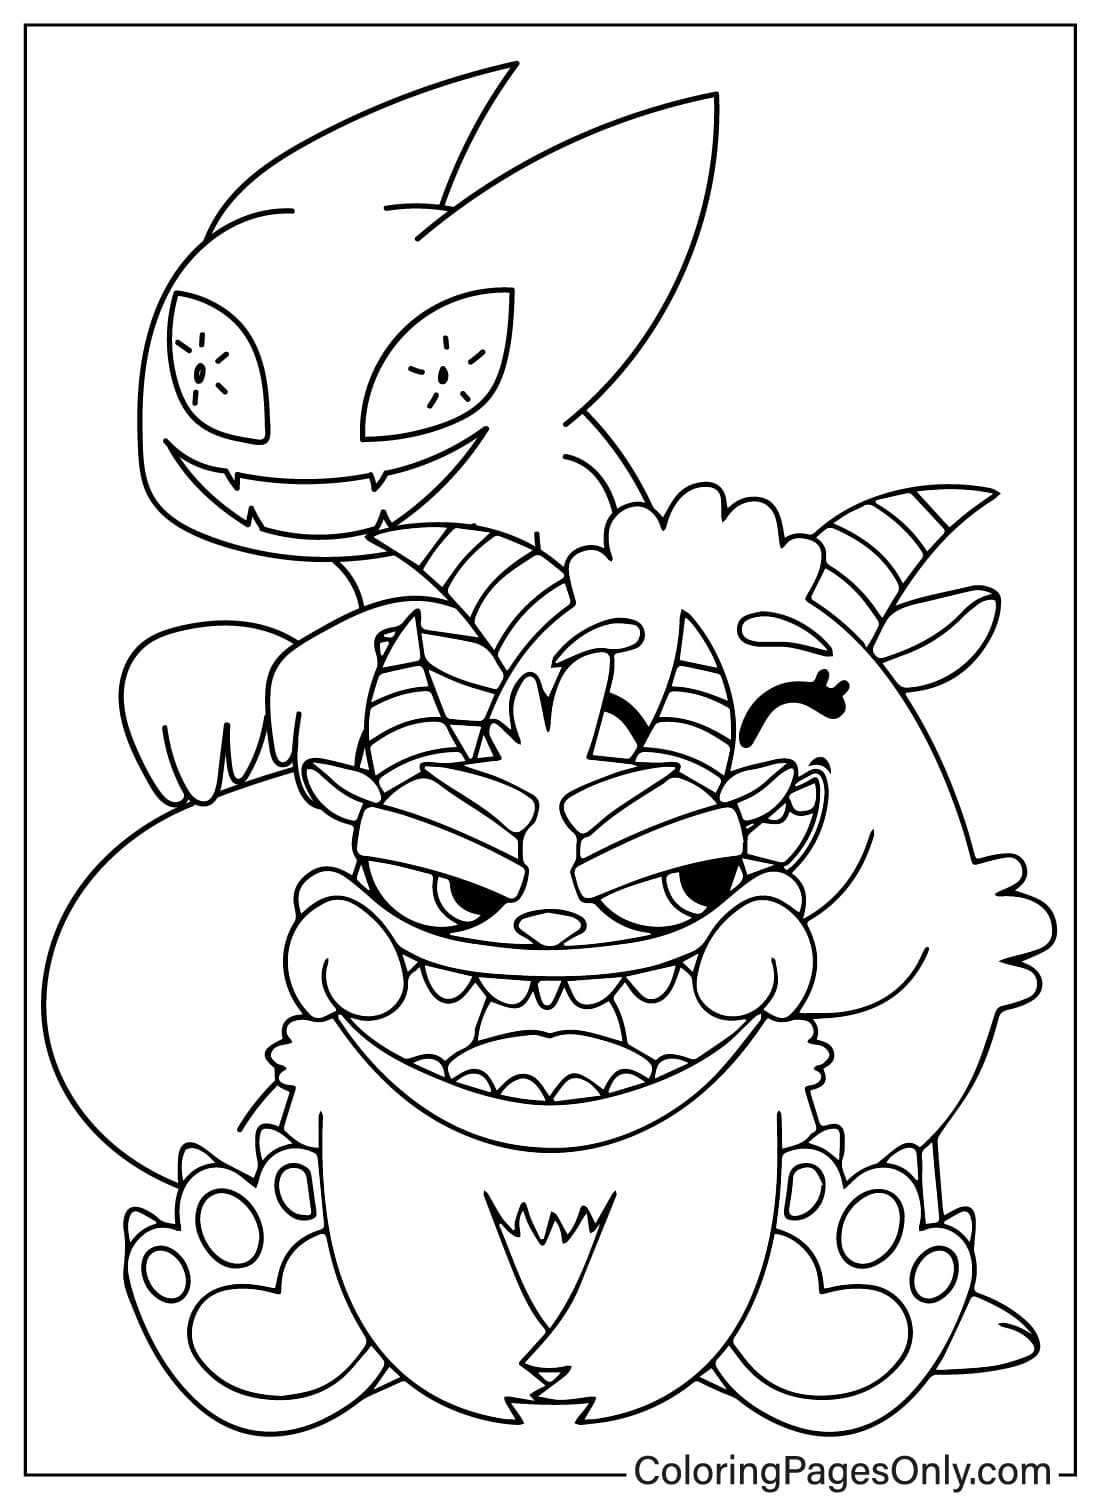 Ghazt Images Coloring Page from Ghazt